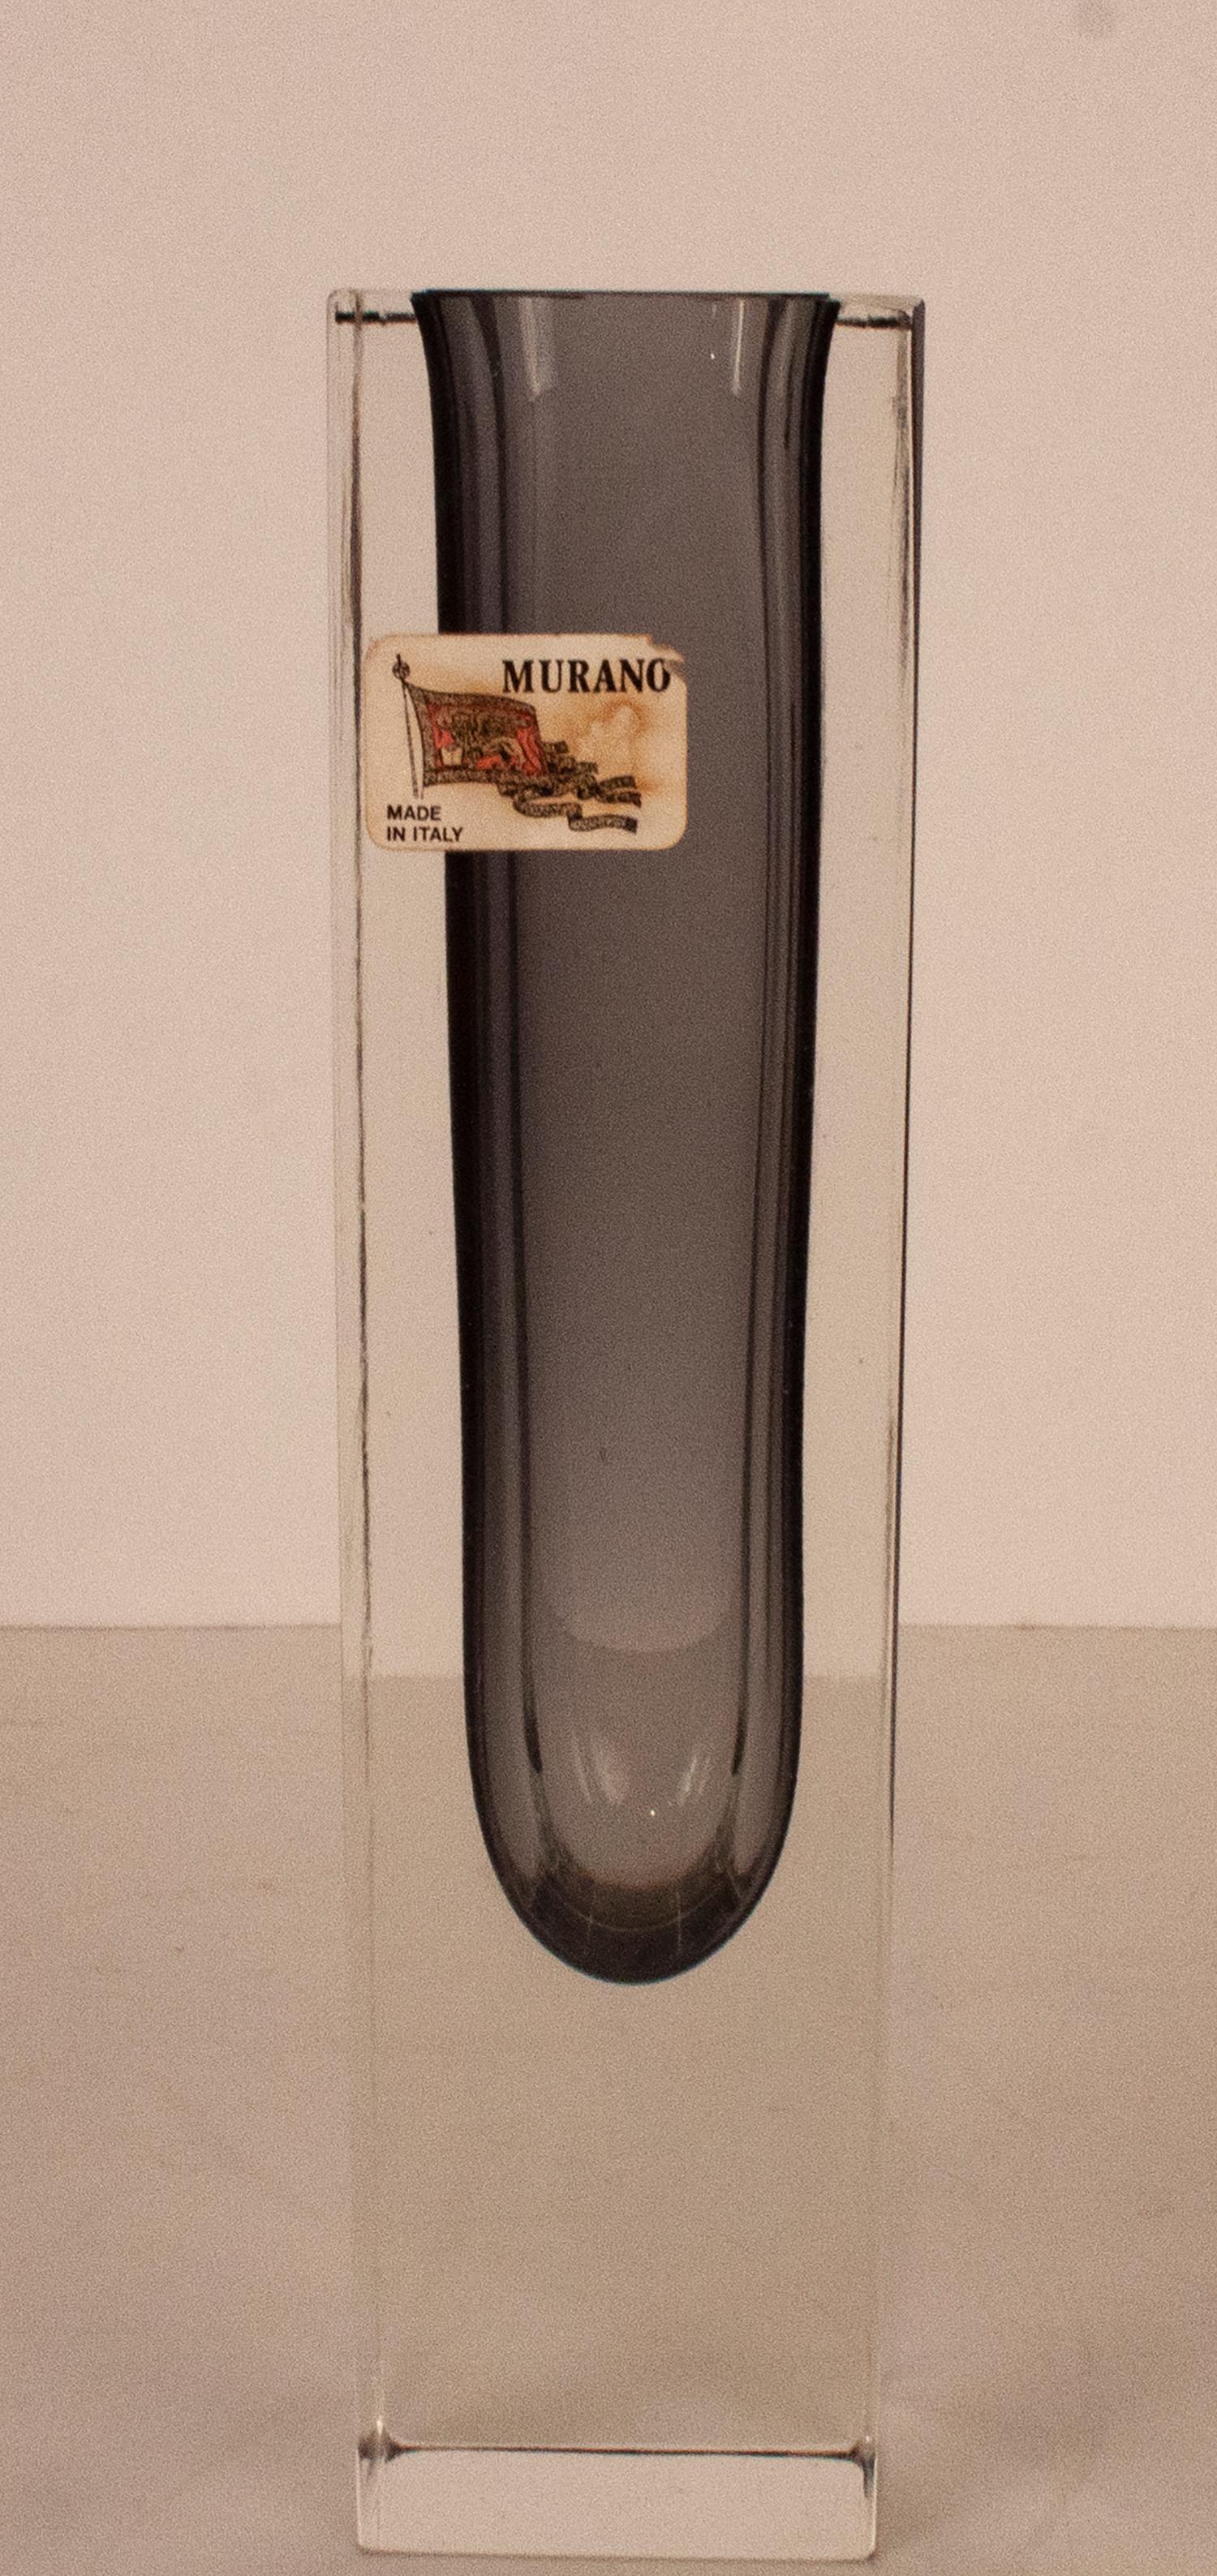 Murano vase in clear and gray mouth blown art glass. Italian design, 1960s.
Measures: 5 x 5 cm. Height 20cm.
With its original label
In excellent condition.